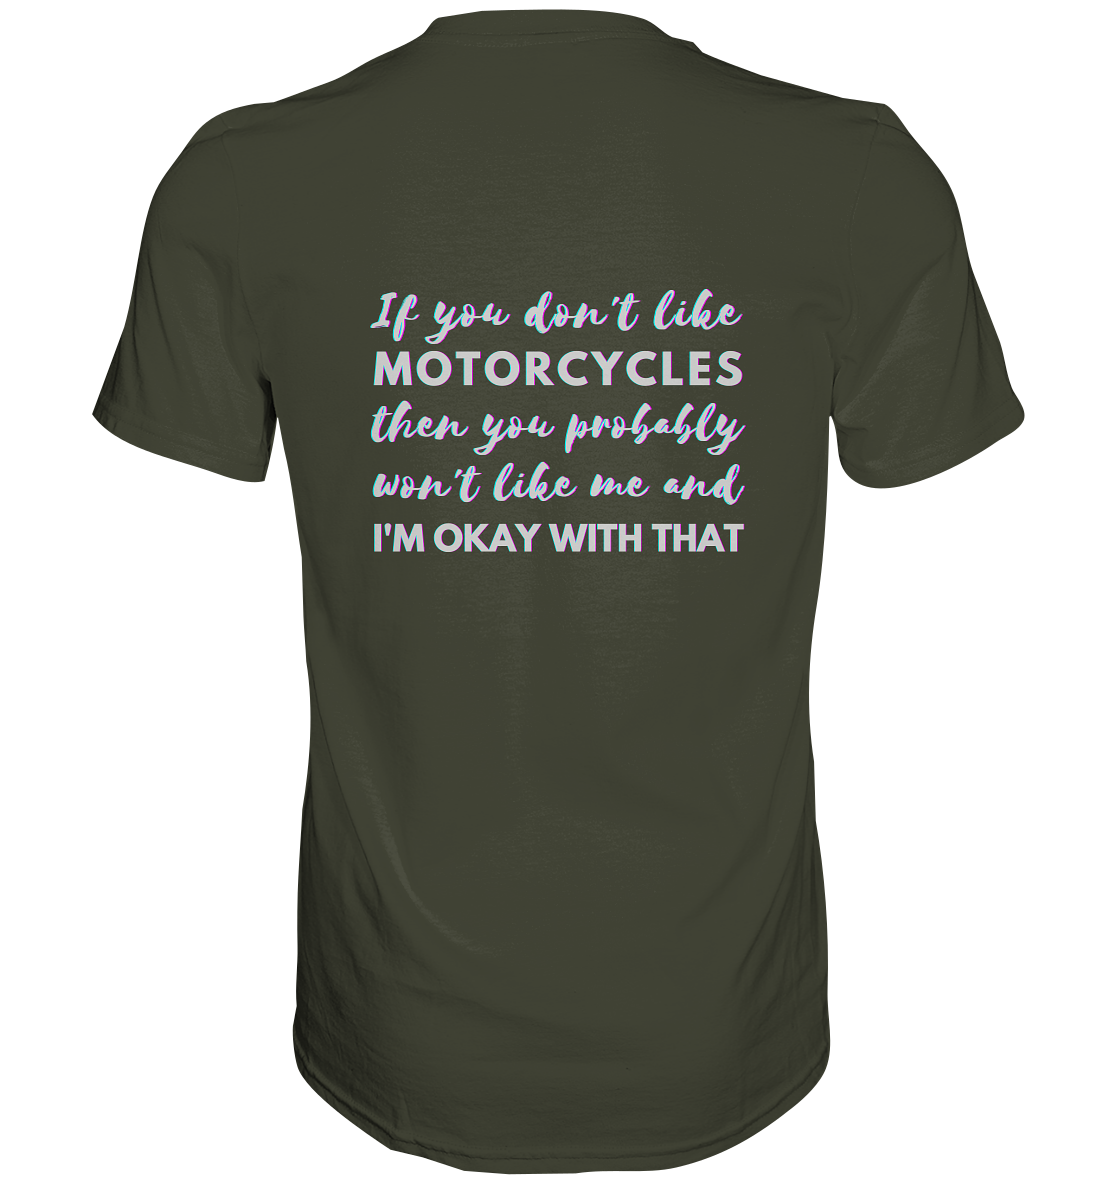 Herren-T-Shirt, Rundhals, mit weißem Spruch auf dem Rücken "If you don't like motorcycles, you problably won't like me and I'm okay with that." khaki